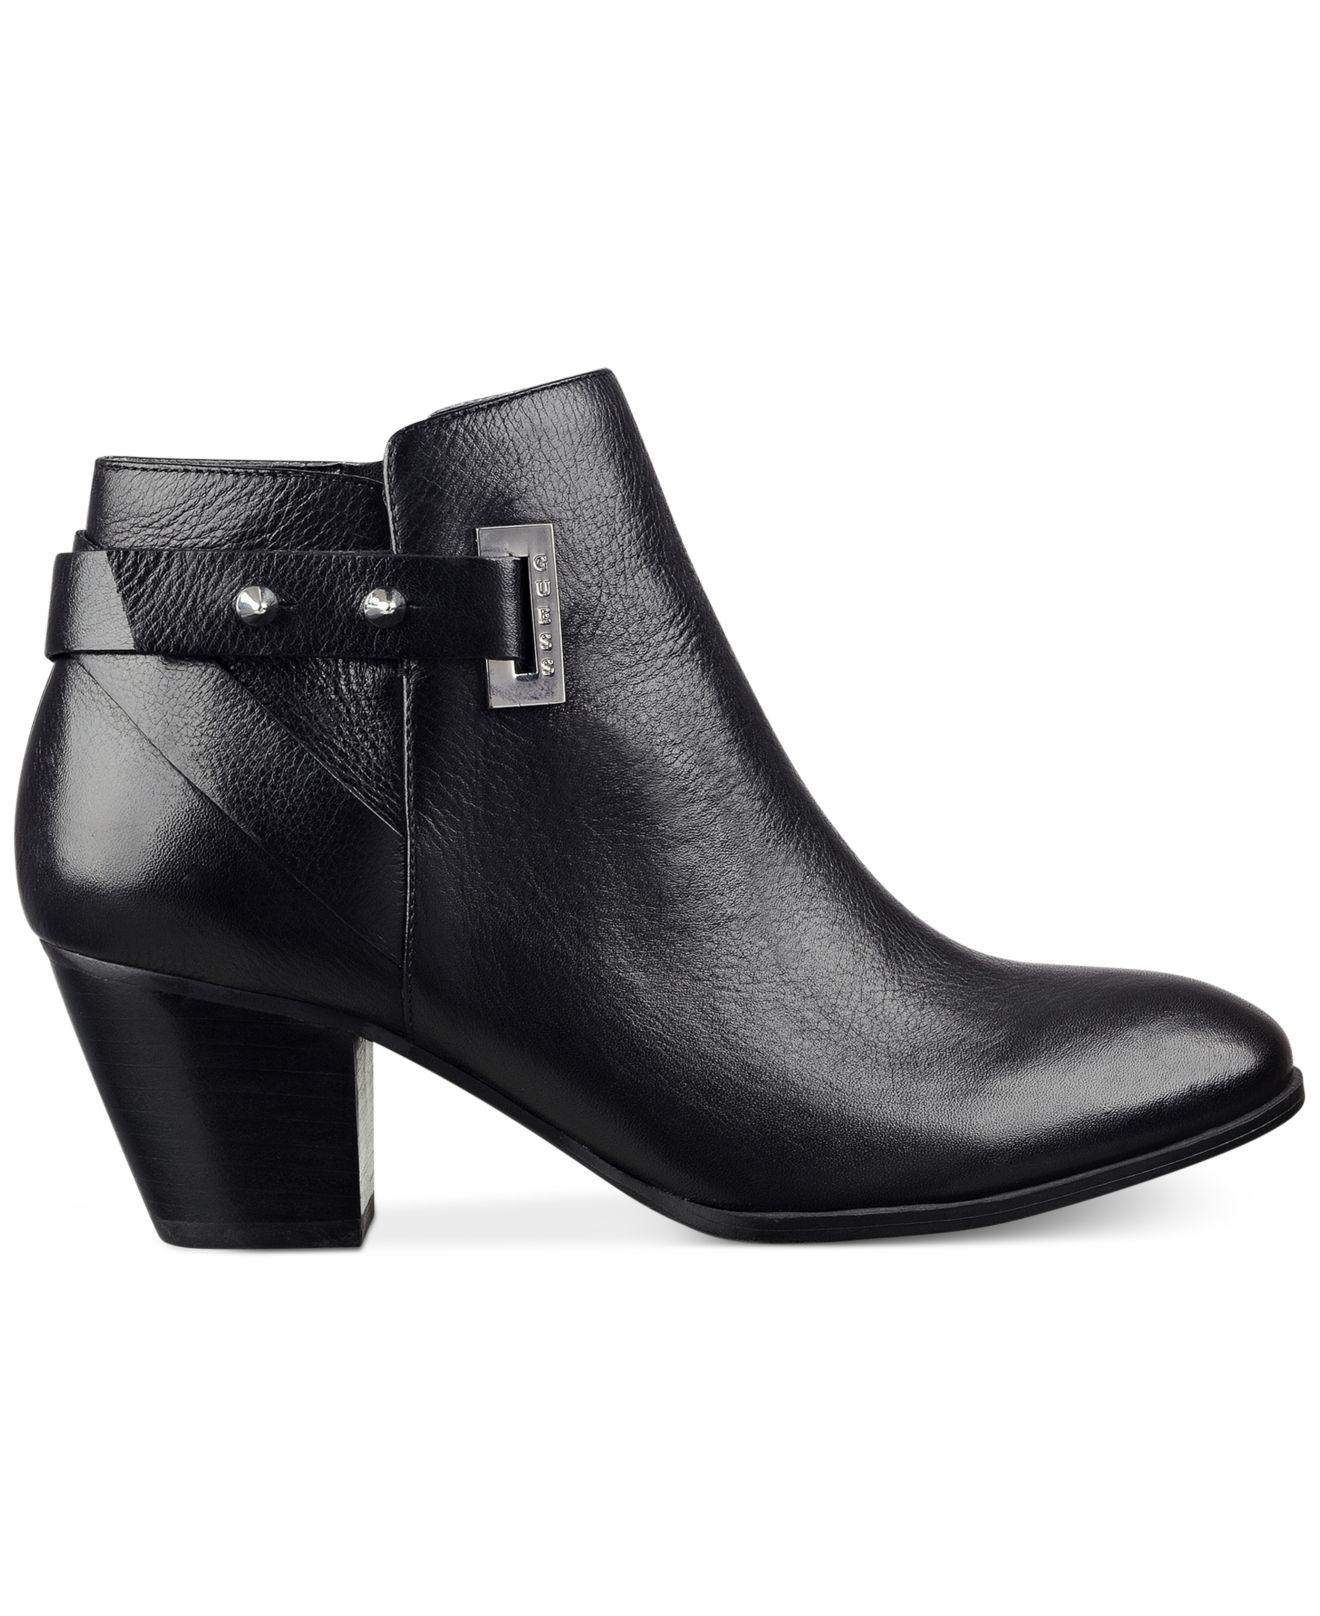 Lyst - Guess Women's Verity Ankle Booties in Black